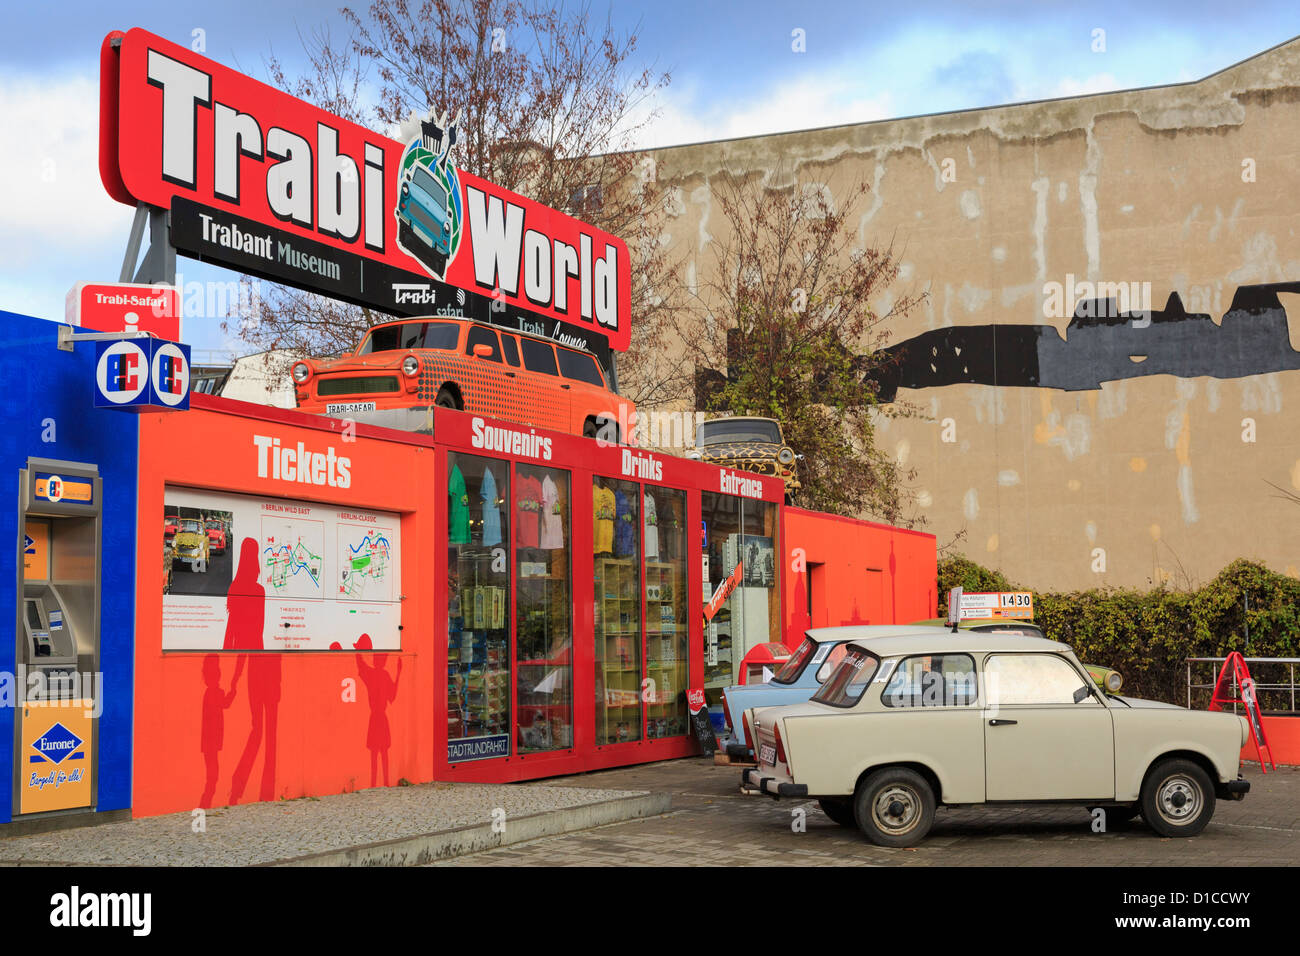 Old Trabant safari cars outside Trabi World museum used for city sightseeing tours in Berlin, Germany Stock Photo